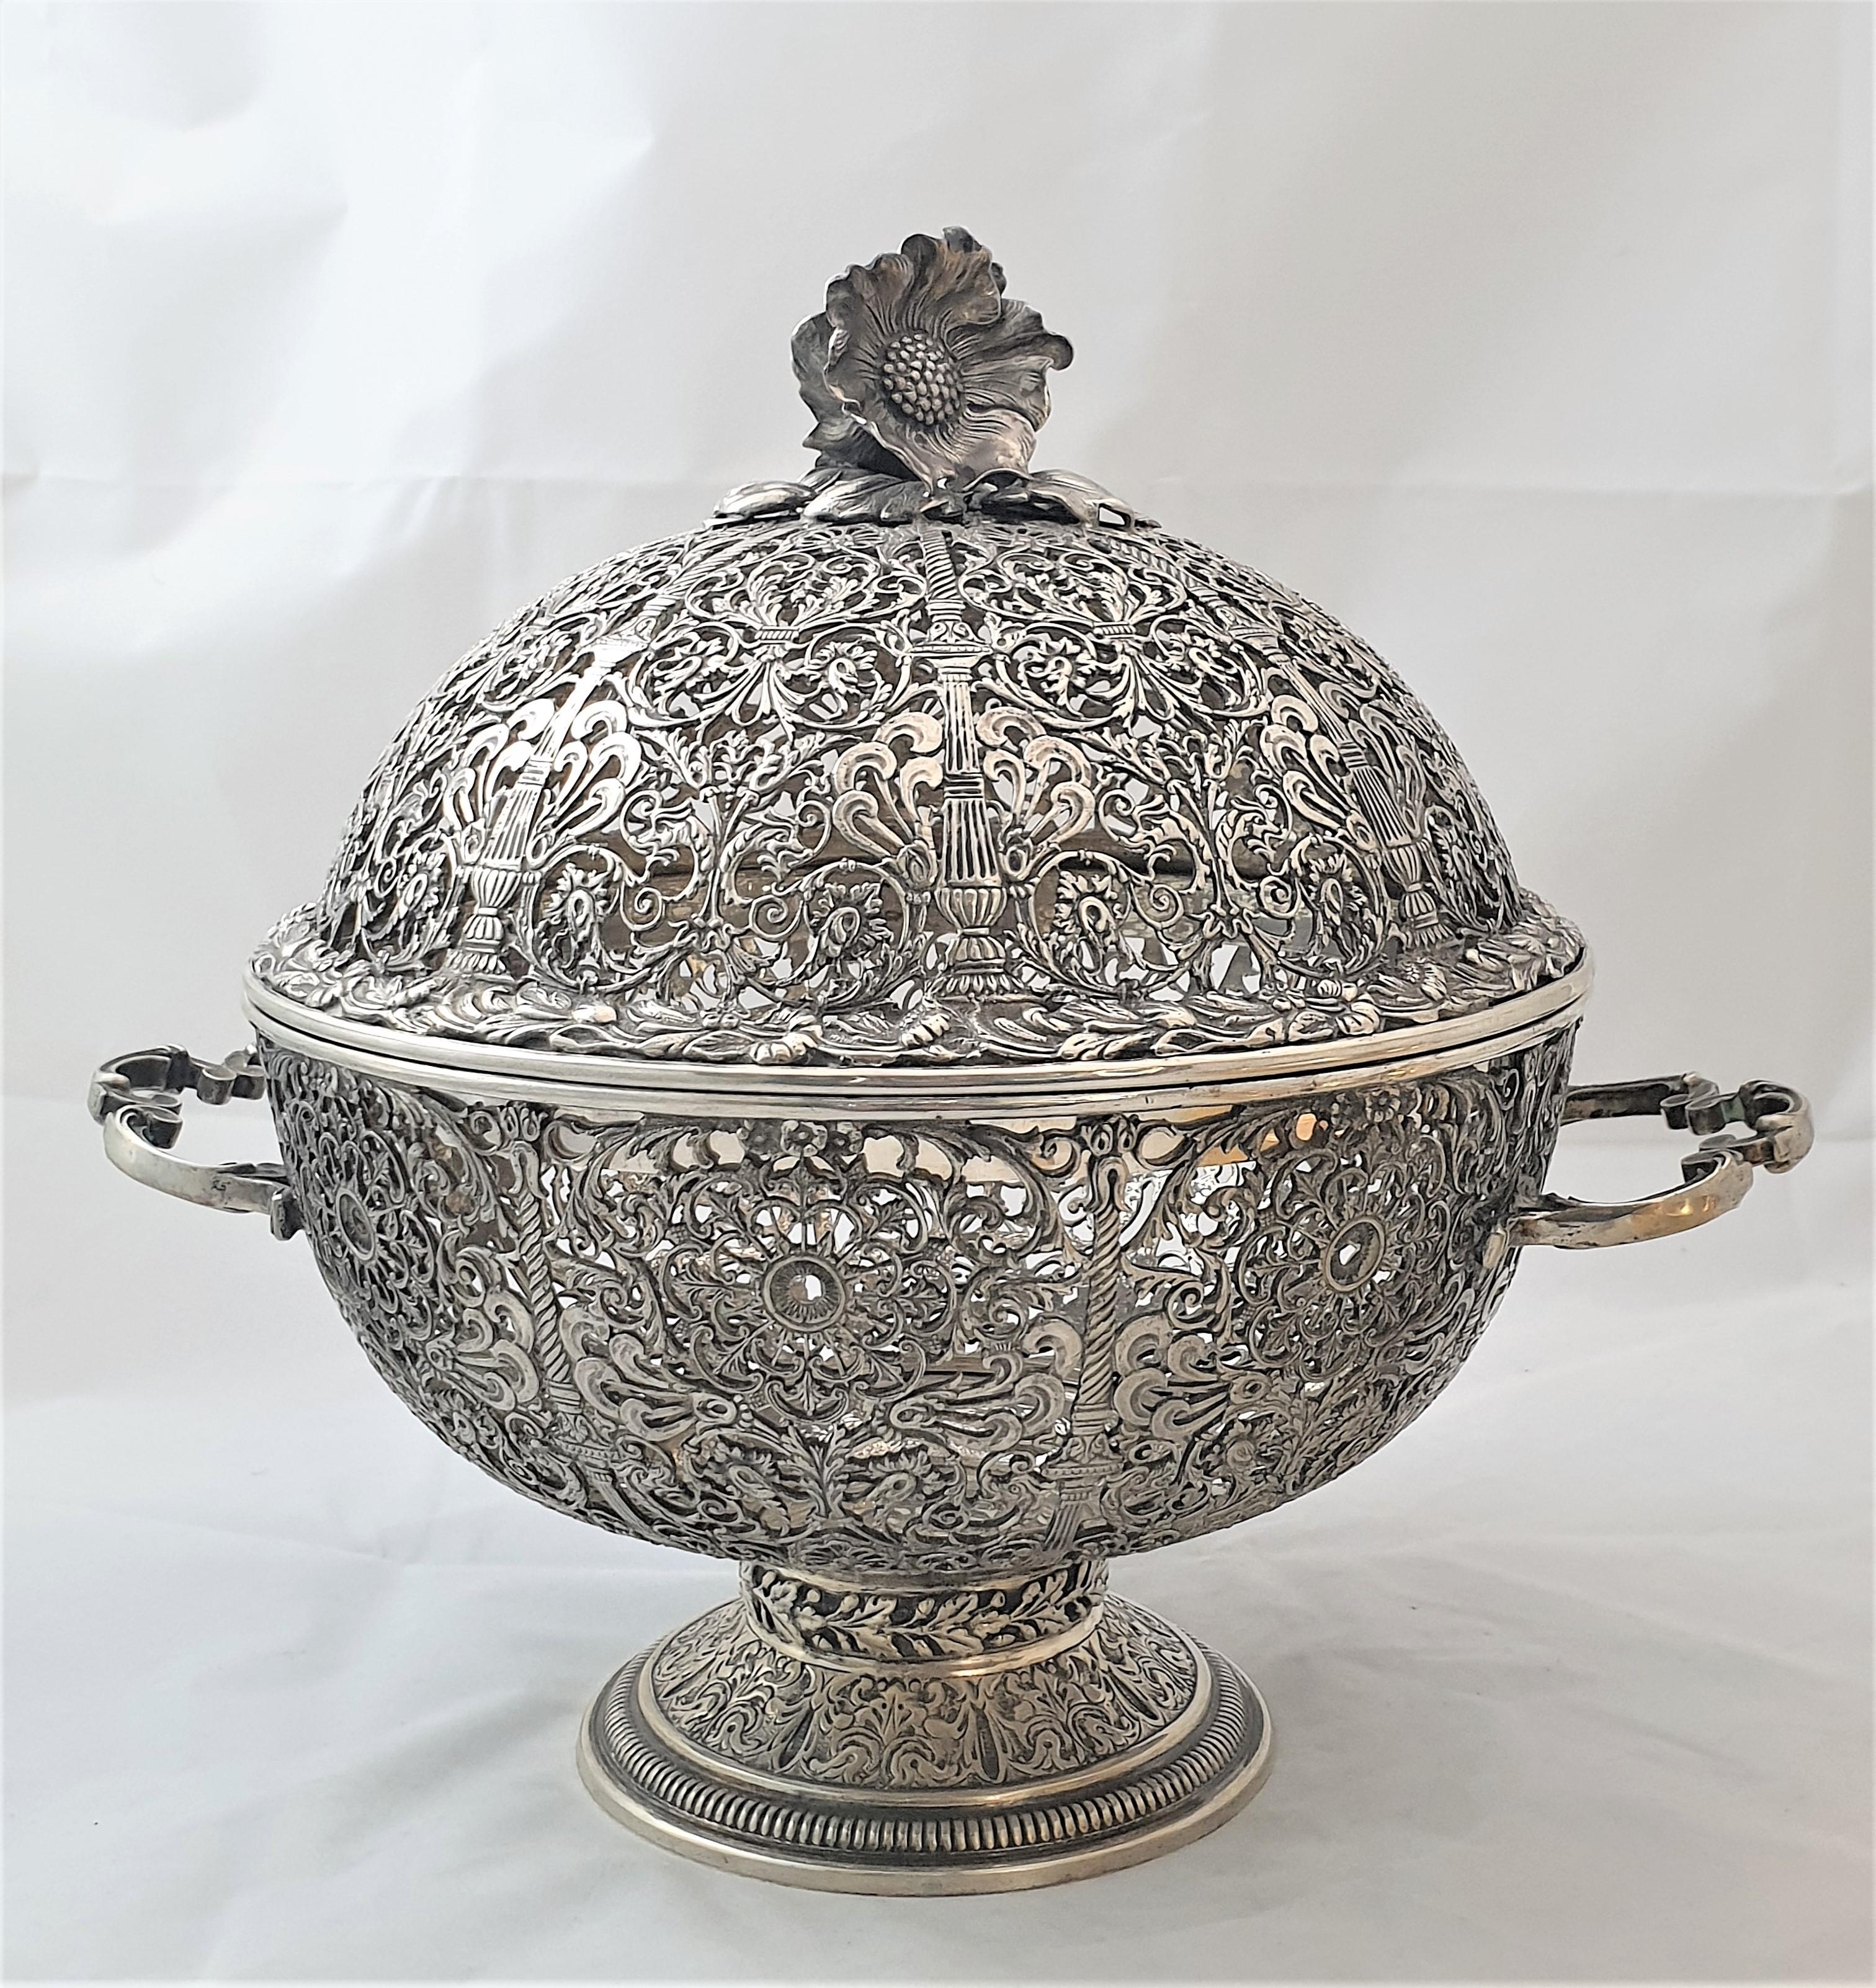 20th Century Italian Silver Fretwork Basket with Cover by Messulam Milan Italy For Sale 1